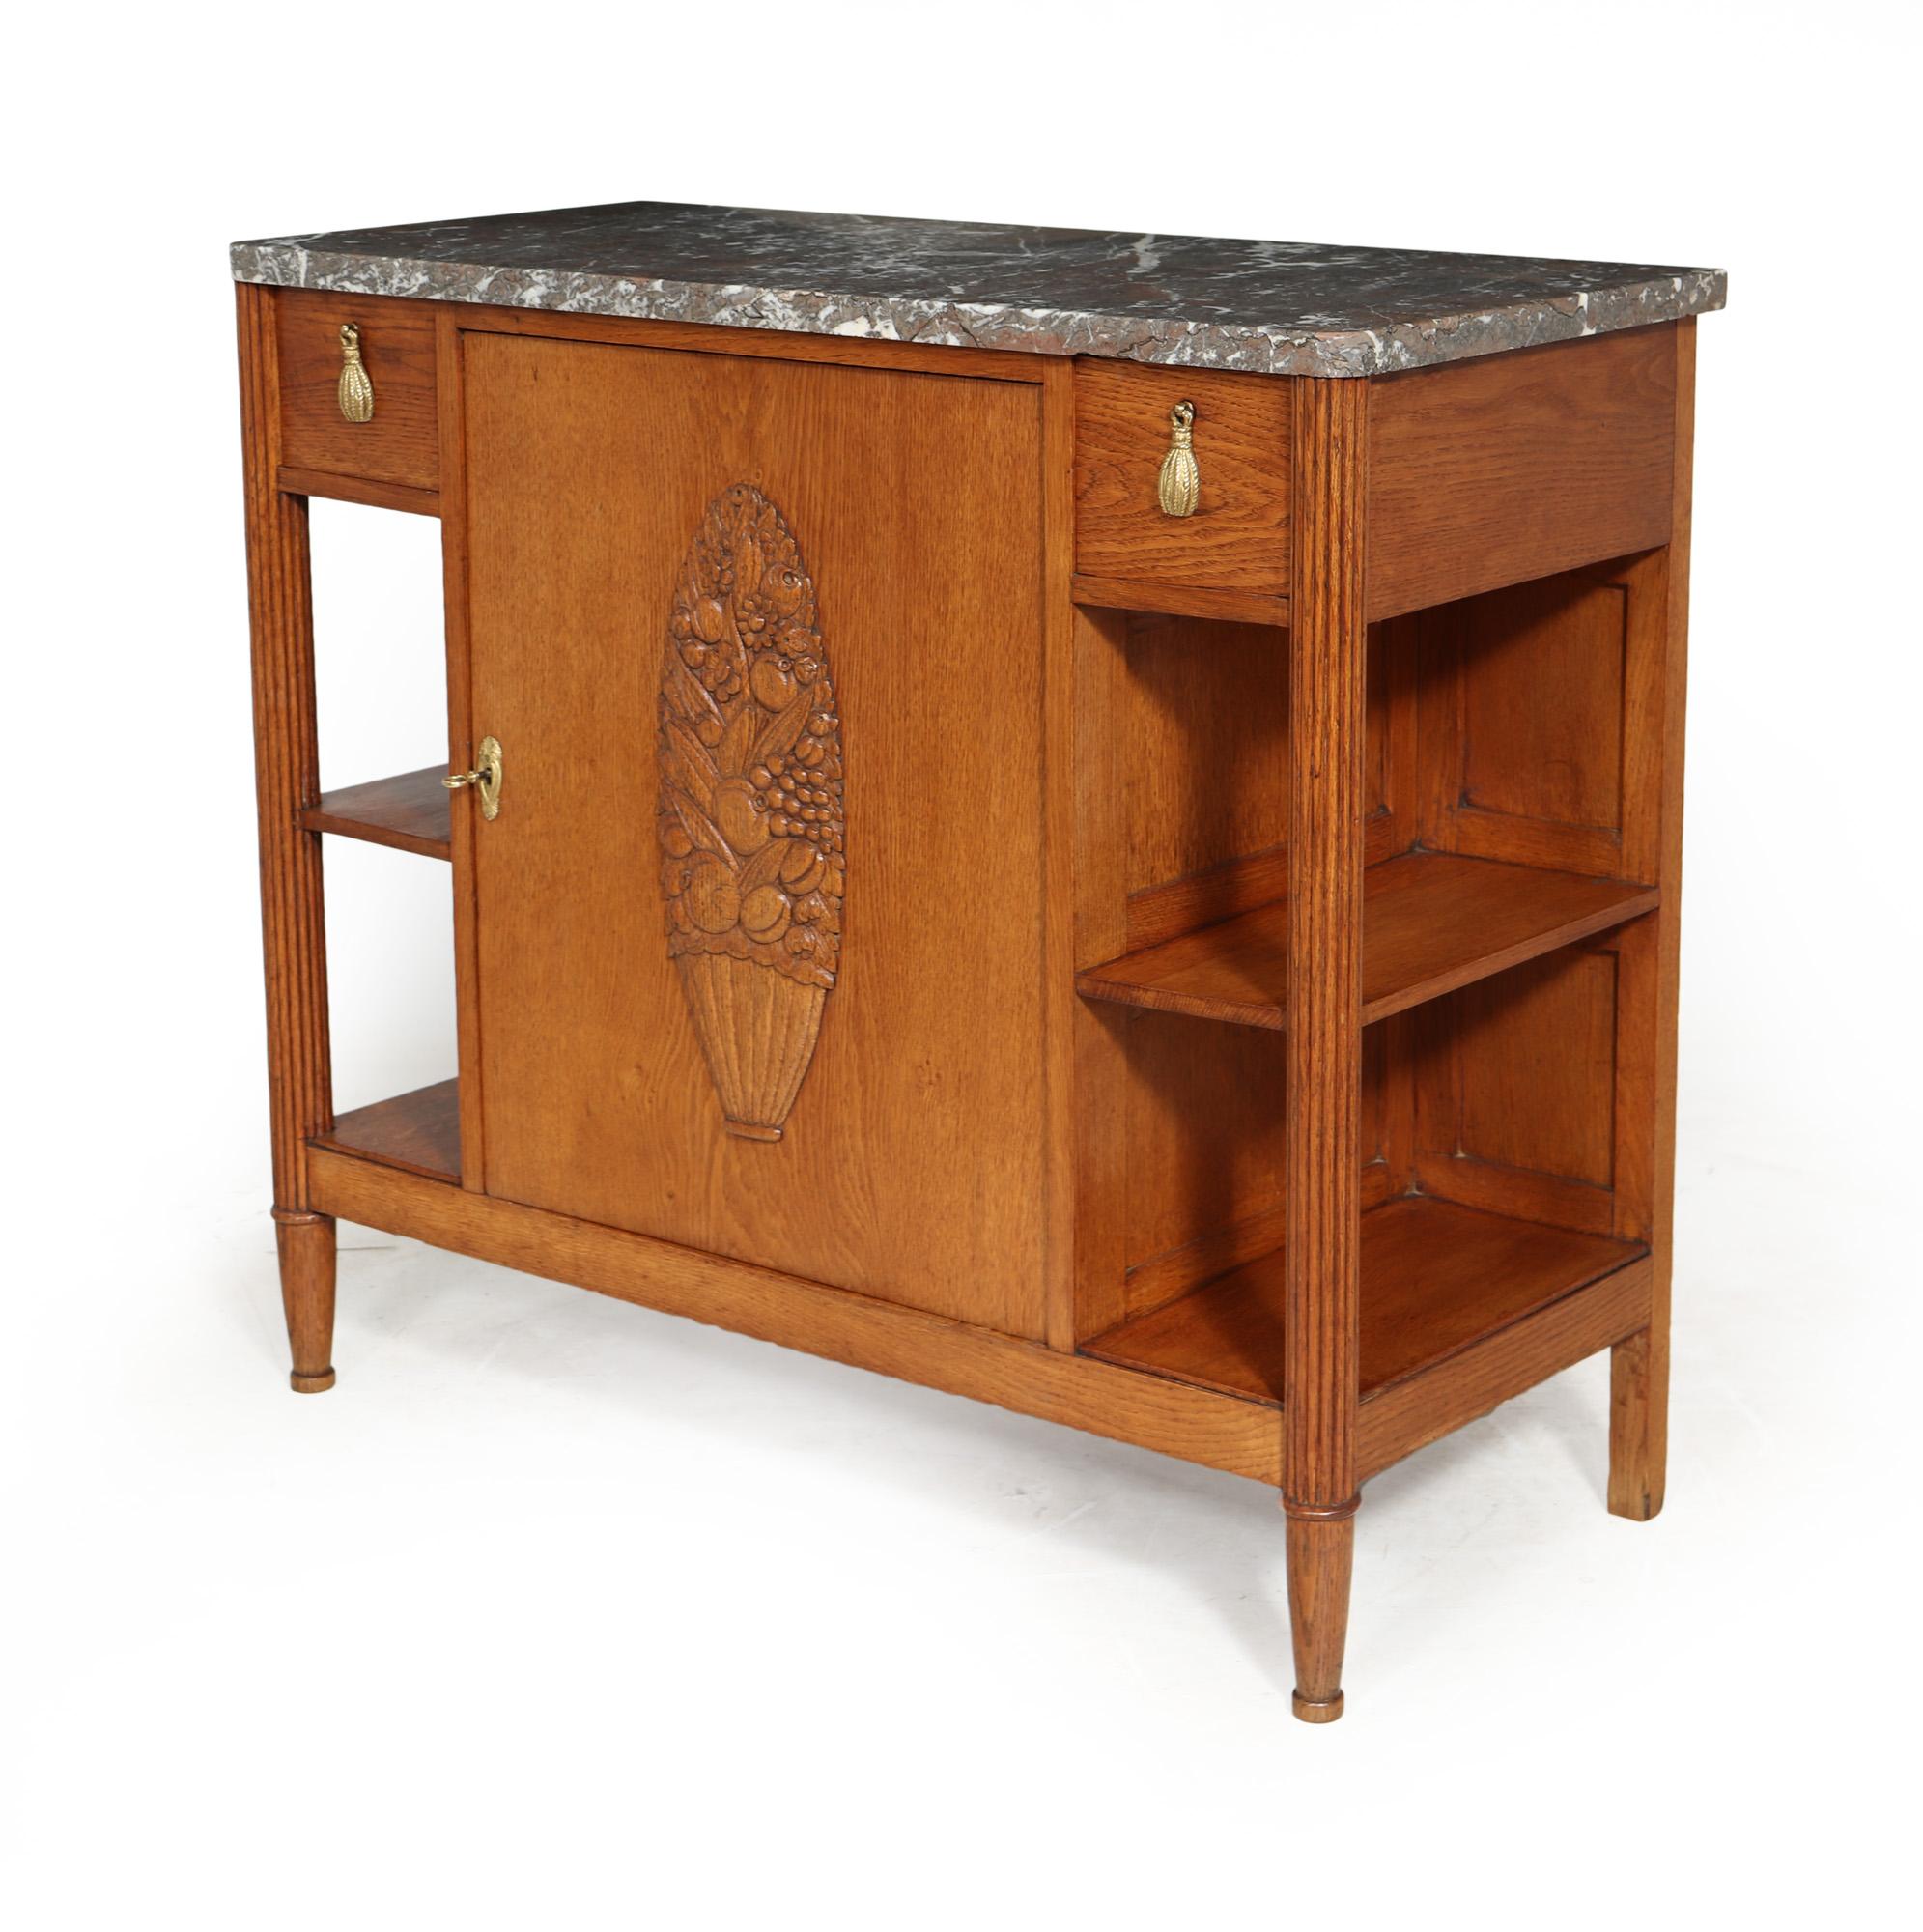 Mid-20th Century French Art Deco Hall Cabinet in Solid Oak